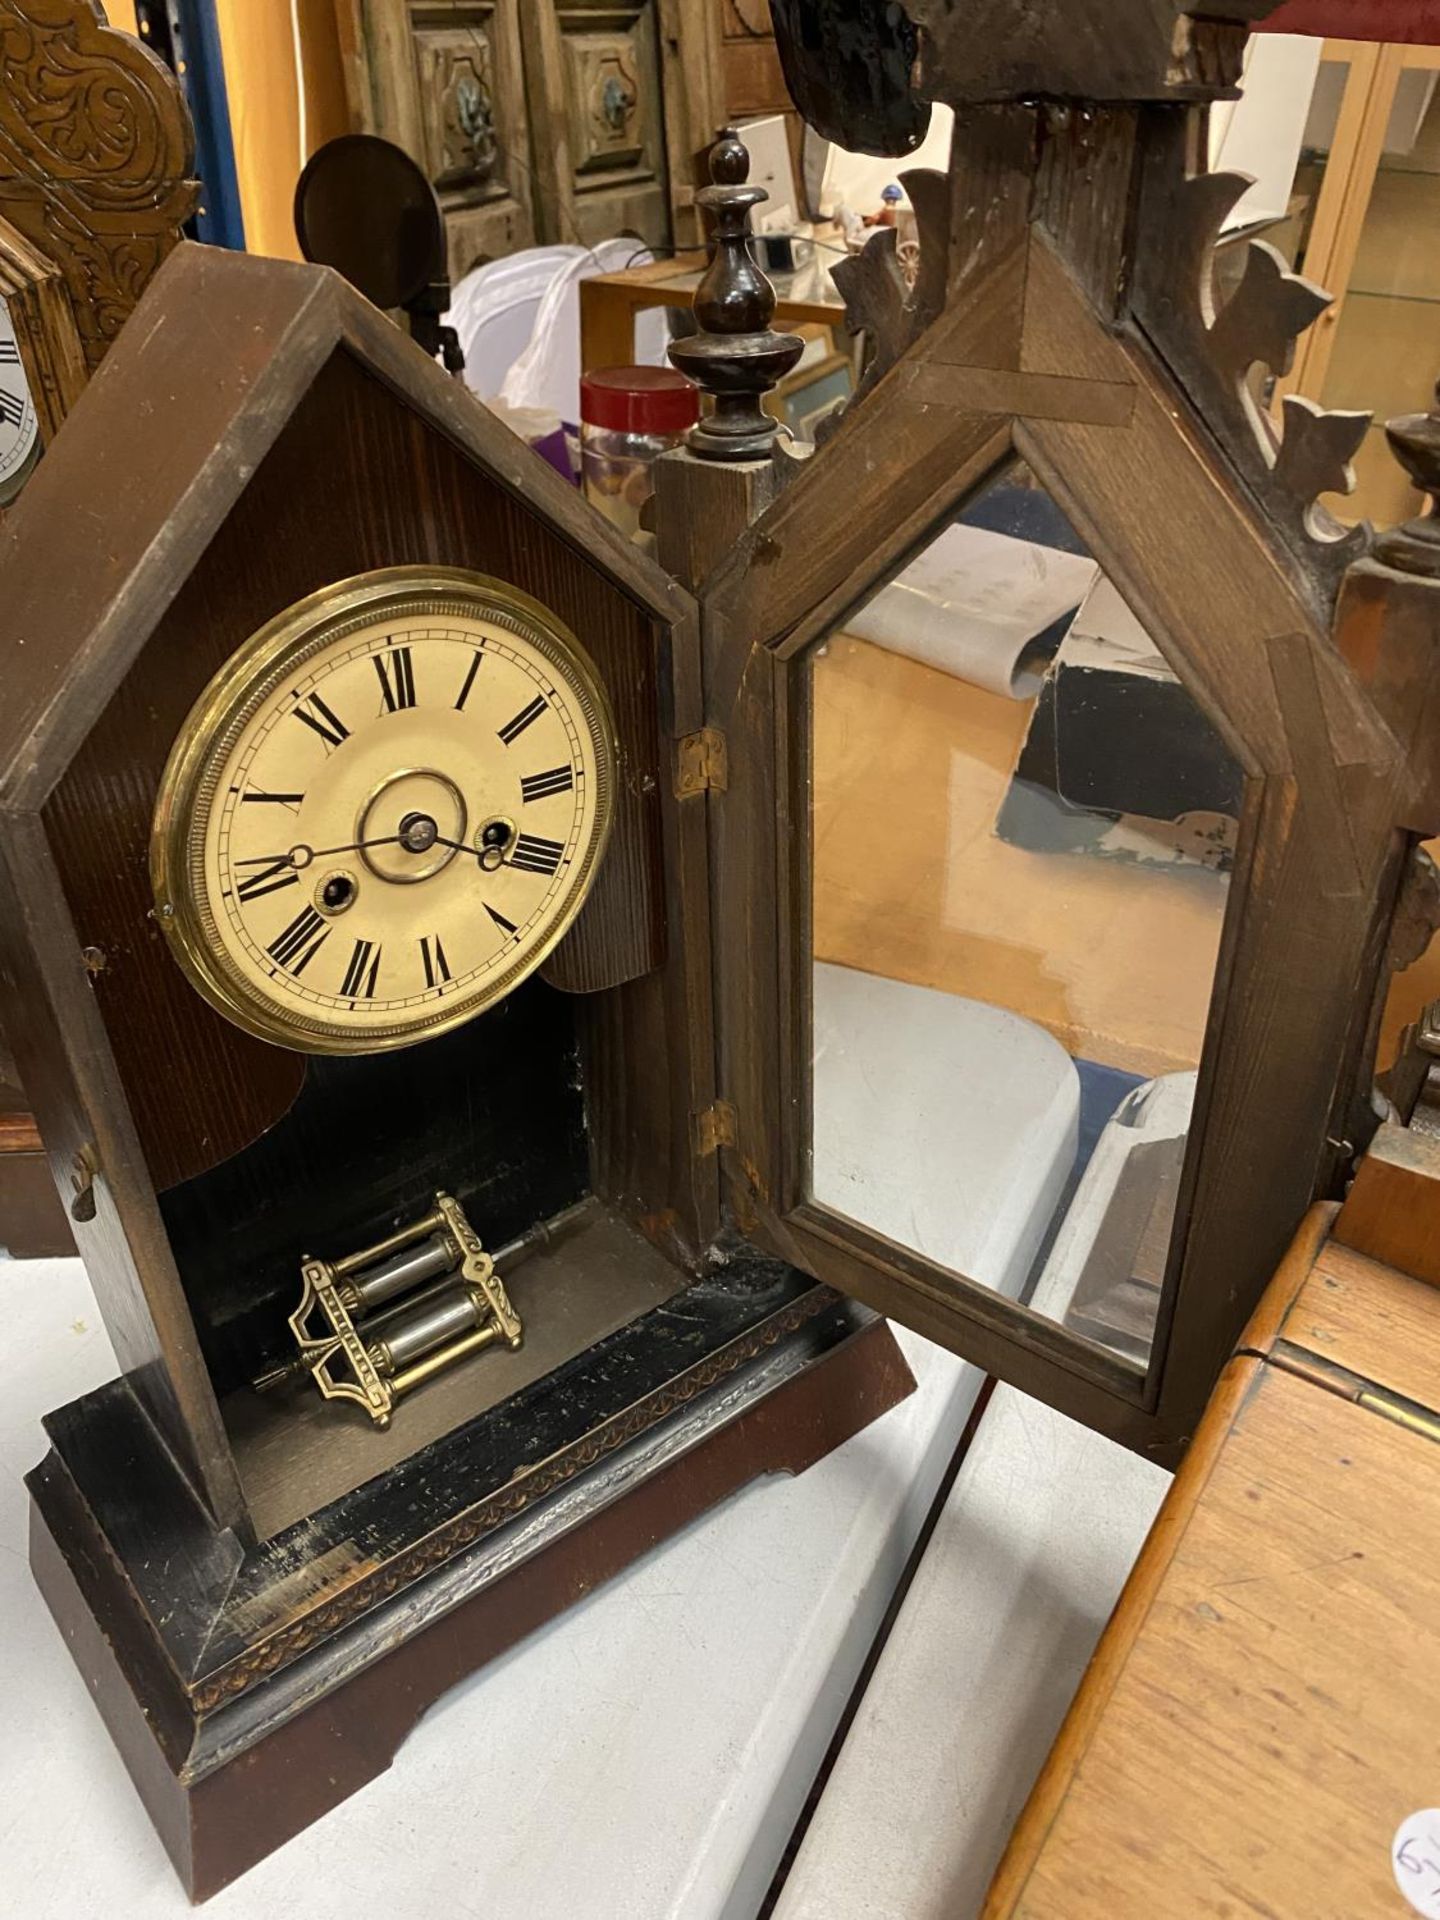 A VINTAGE AMERICAN CLOCK IN A GOTHIC STYLE WOODEN CASE - Image 6 of 6